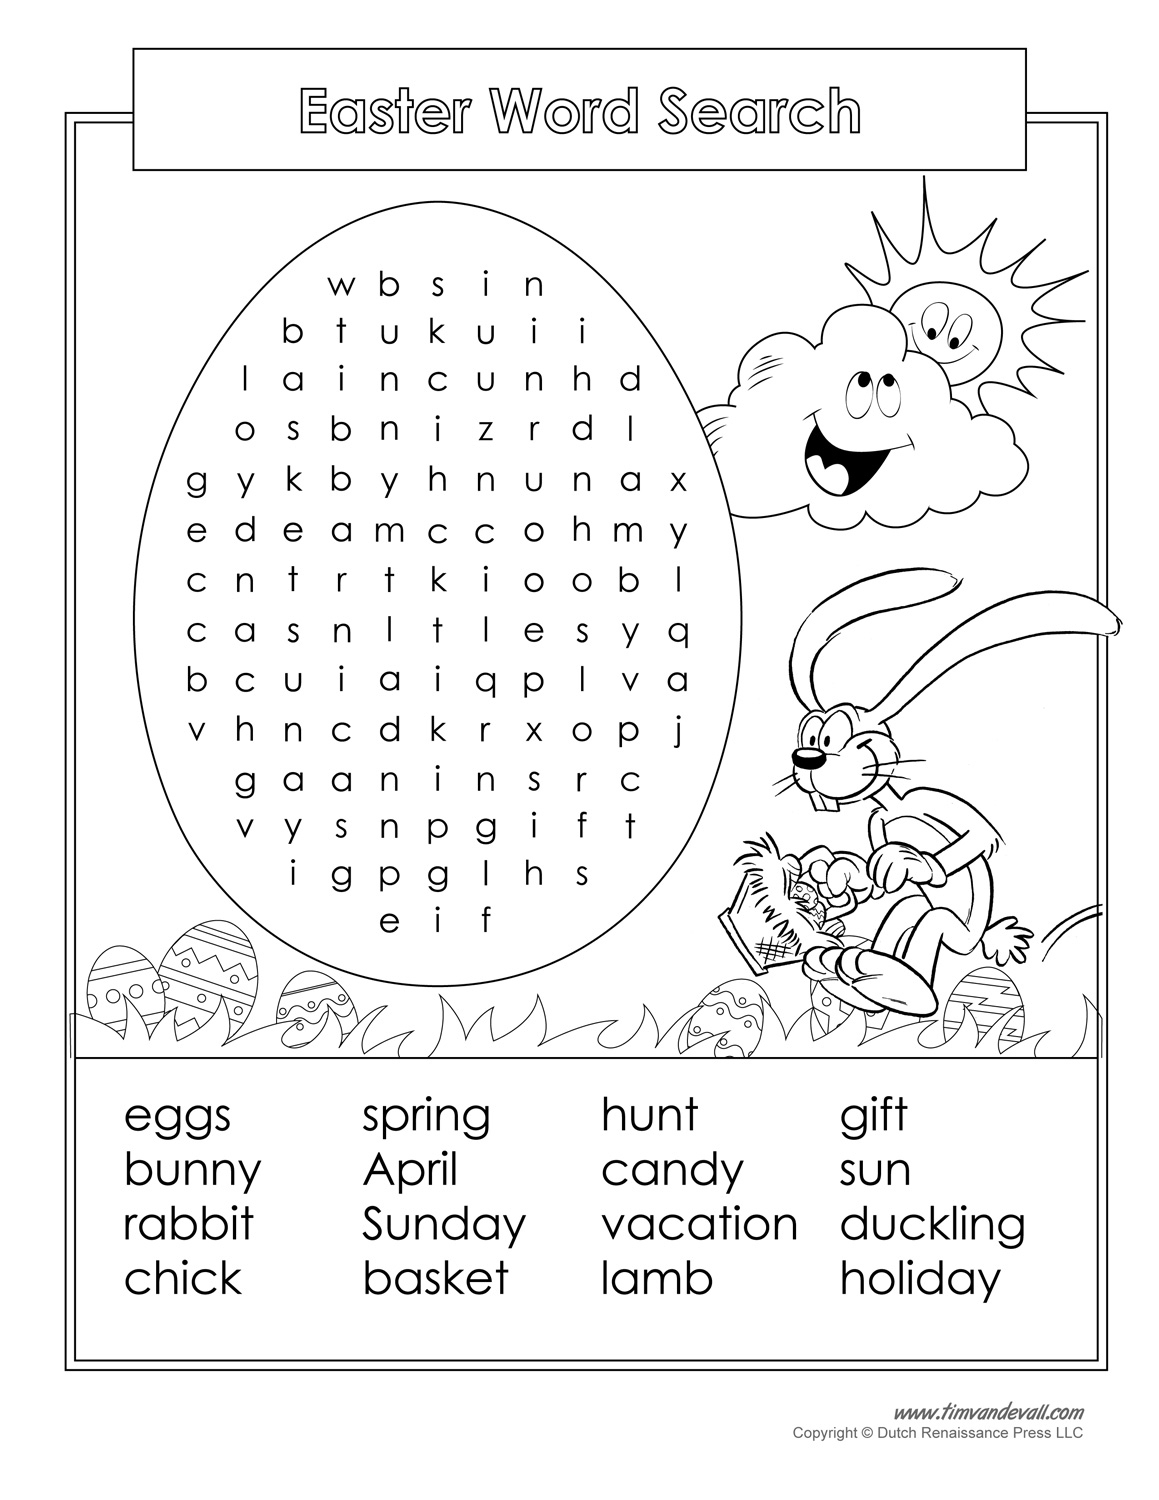 16 Printable Easter Word Search Puzzles | Kittybabylove - Free Printable Religious Easter Word Searches